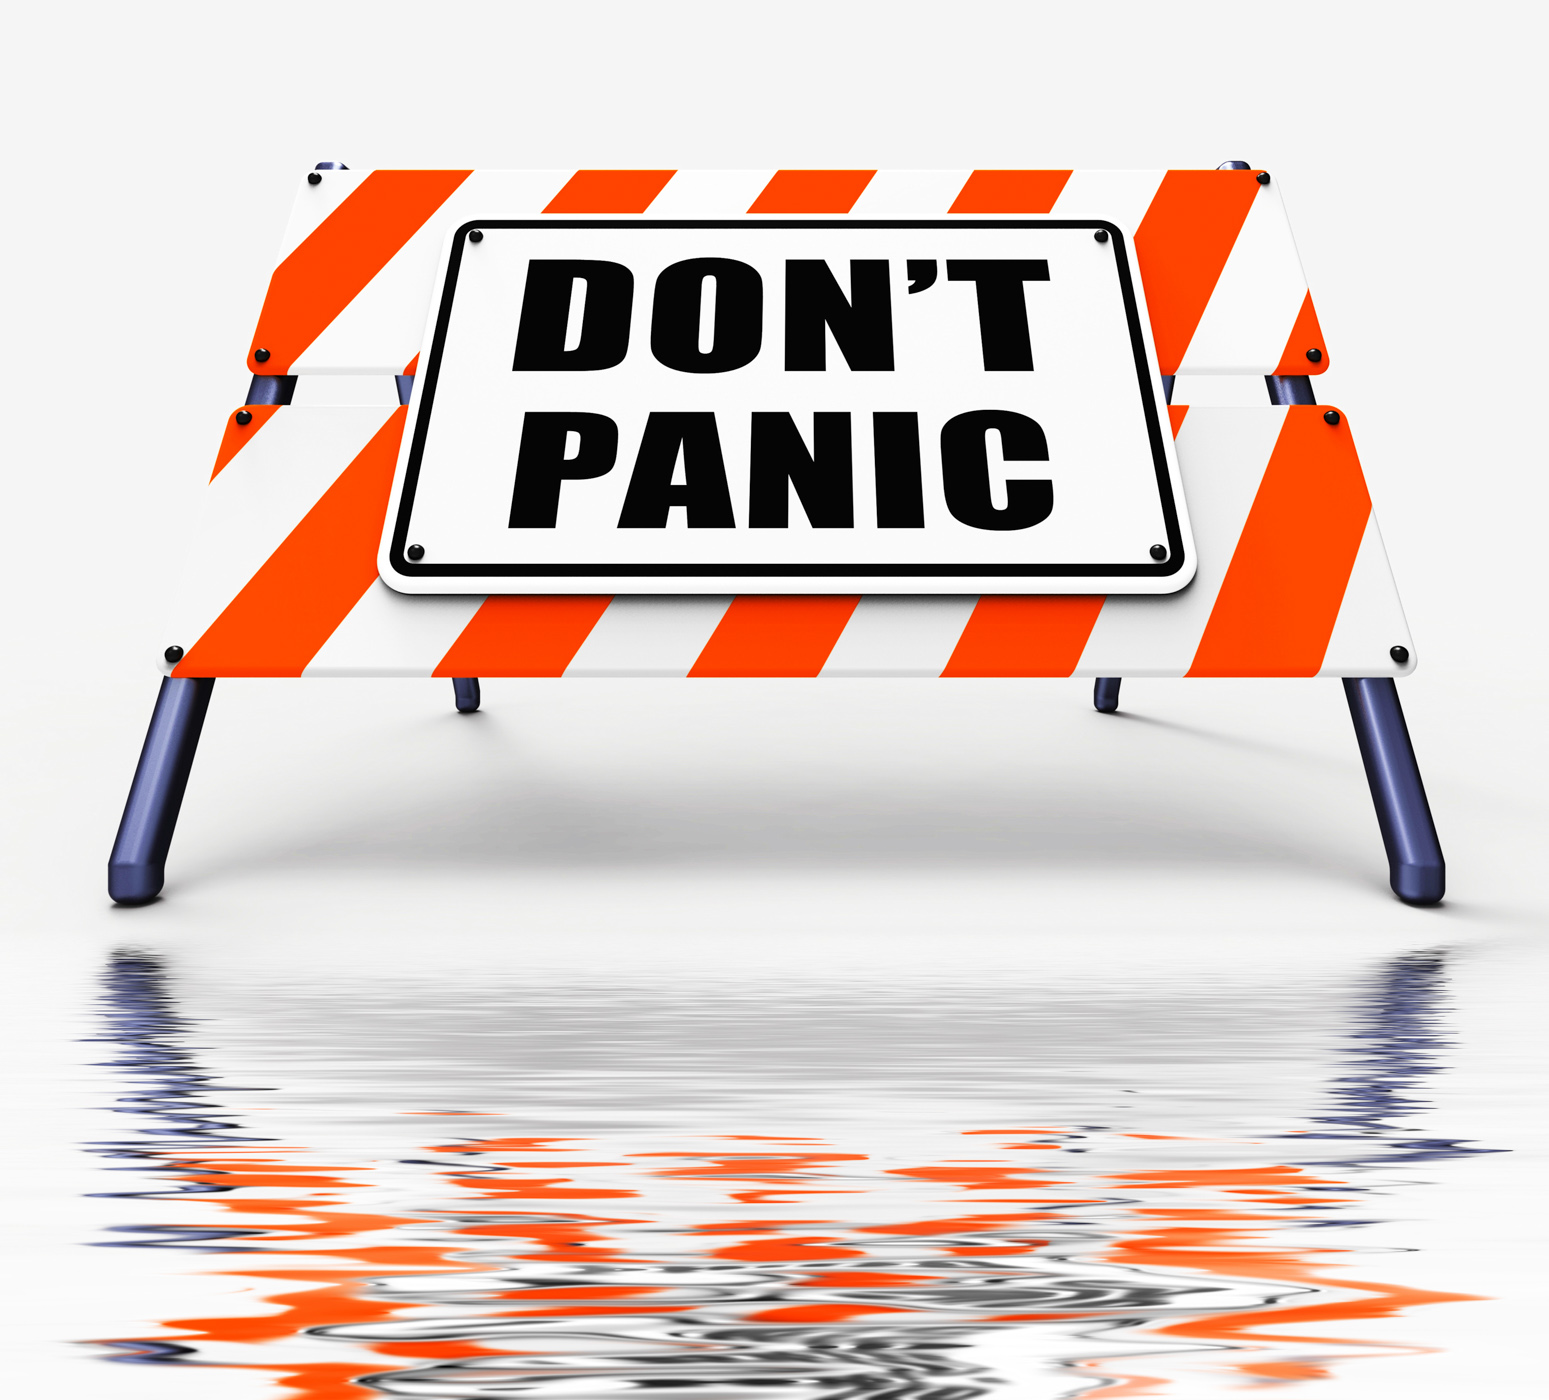 Dont panic sign displays relaxing and avoid panicking photo